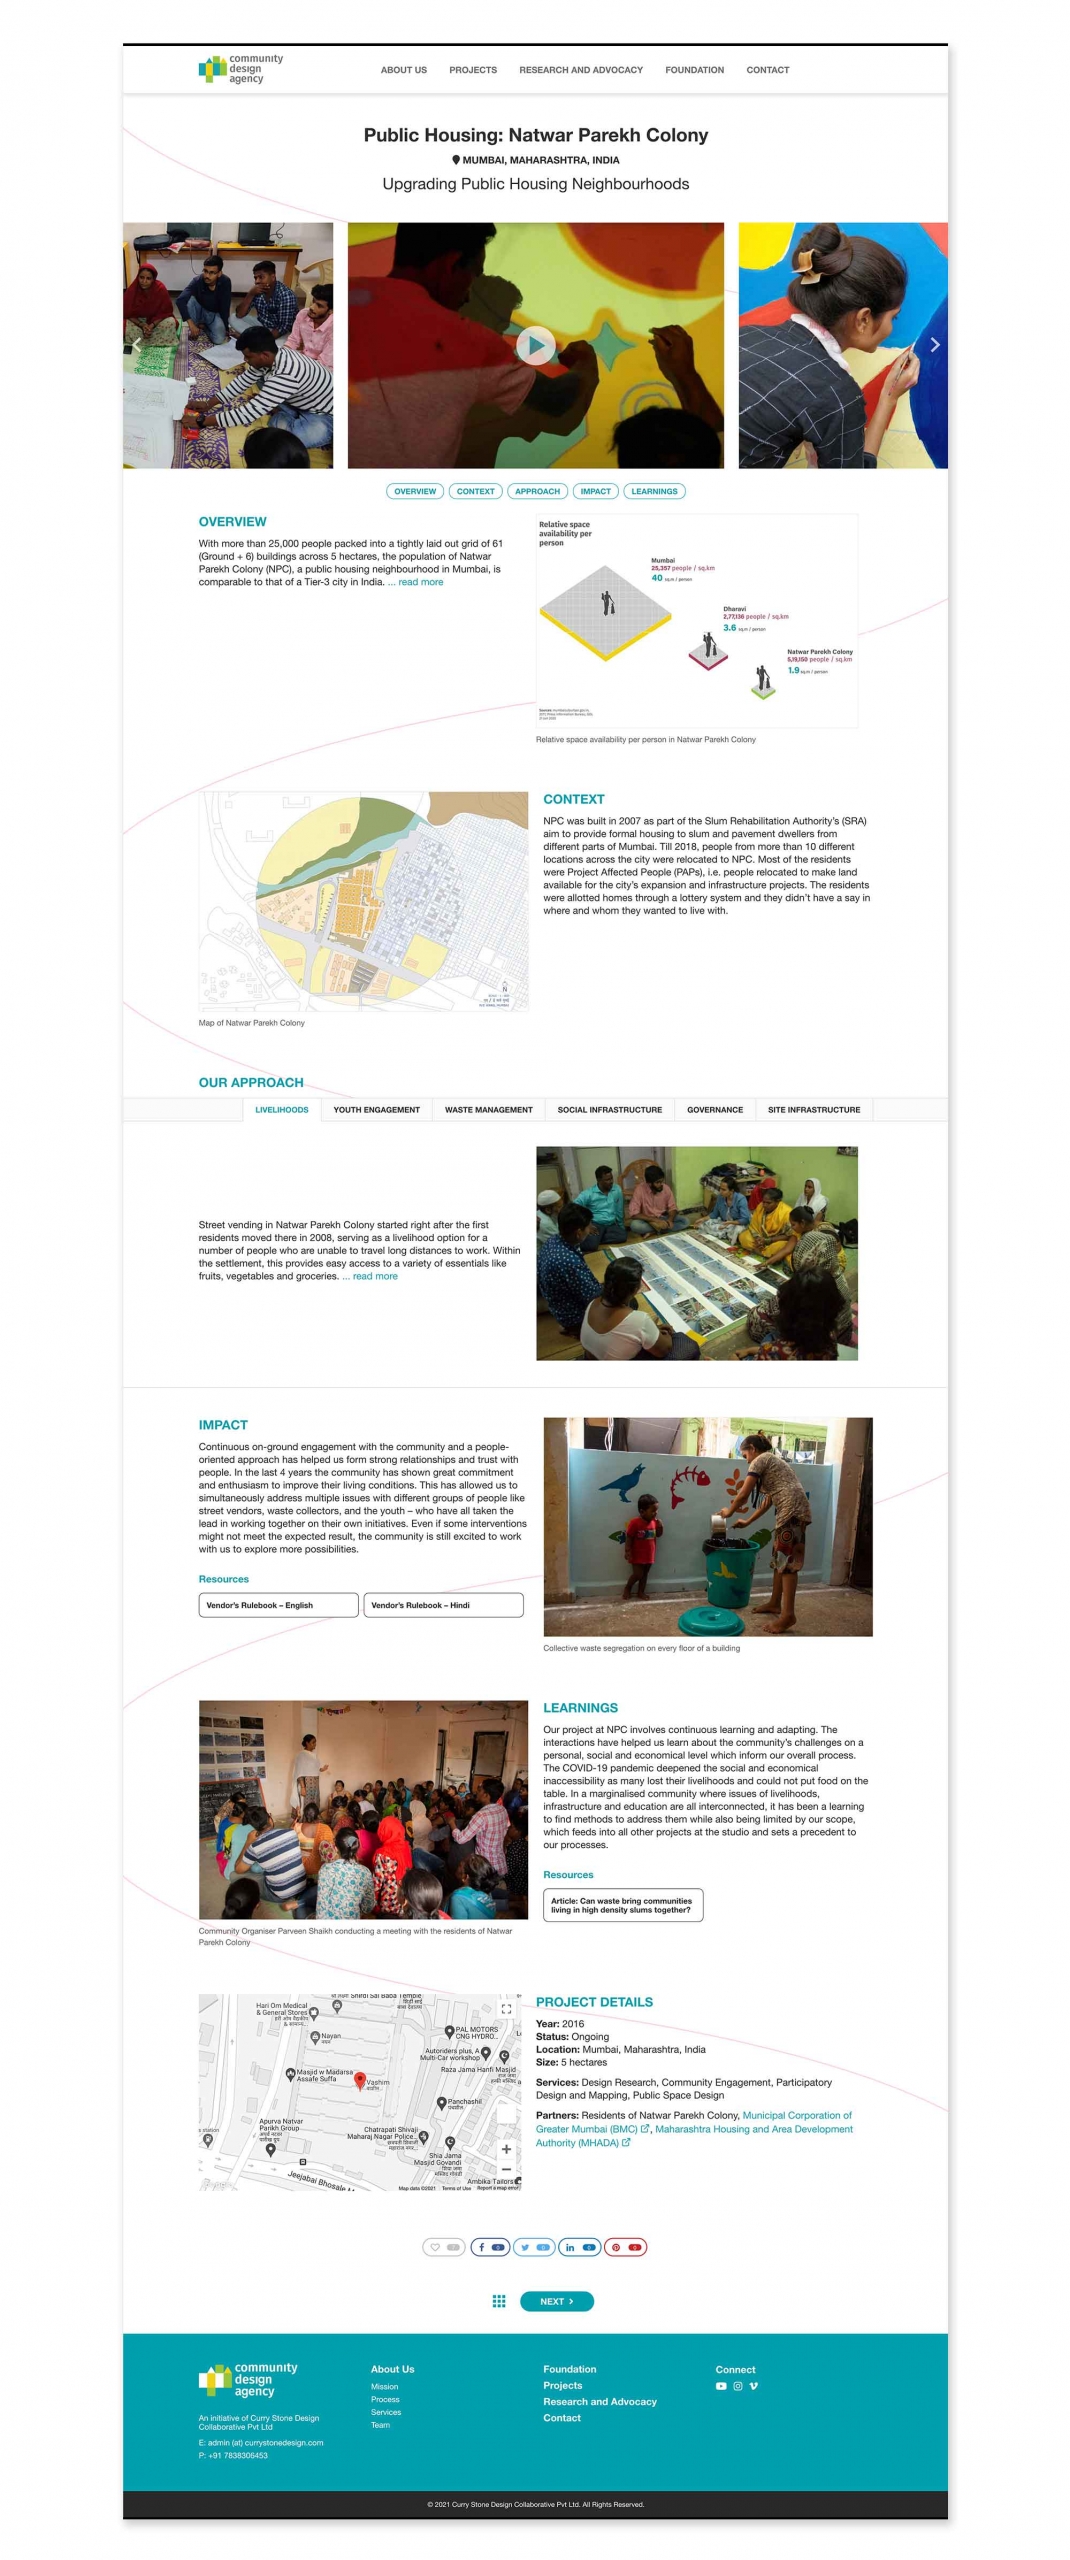 Project Pages highlight specific projects, providing context and approach, impact on the community, key learnings and project details.